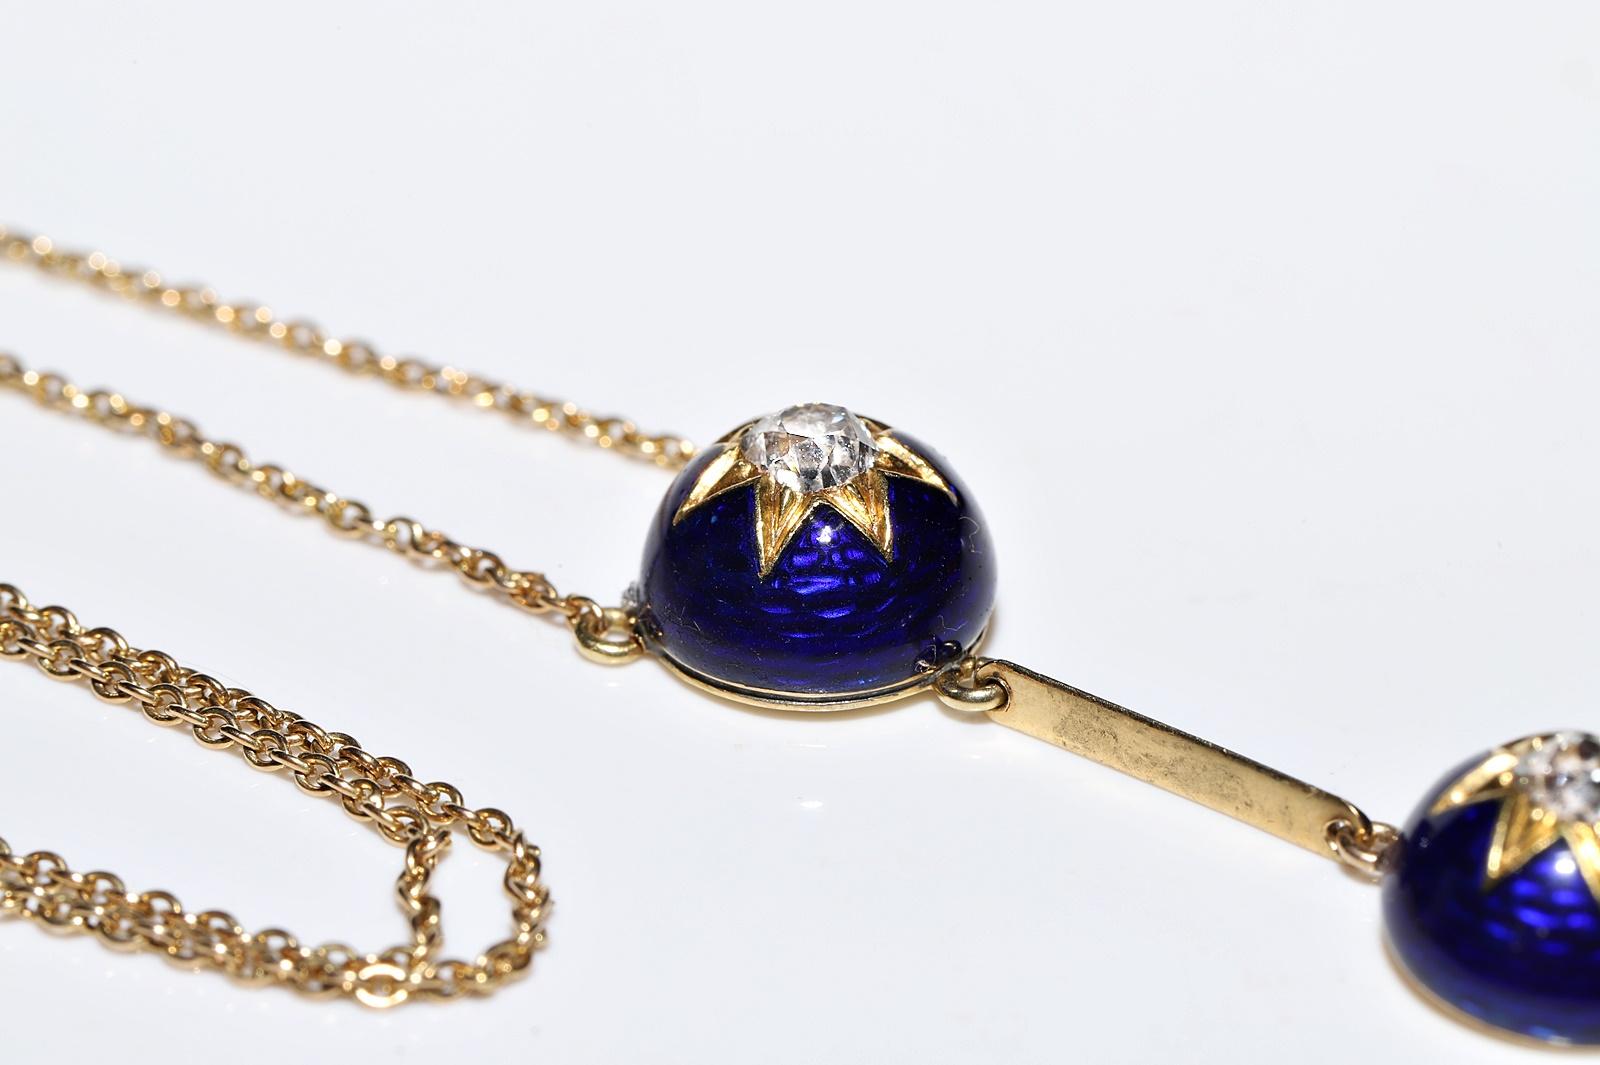 Antique 18K Gold Circa 1900s Natural Old Mine Cut Diamond And Enamel Necklace For Sale 10